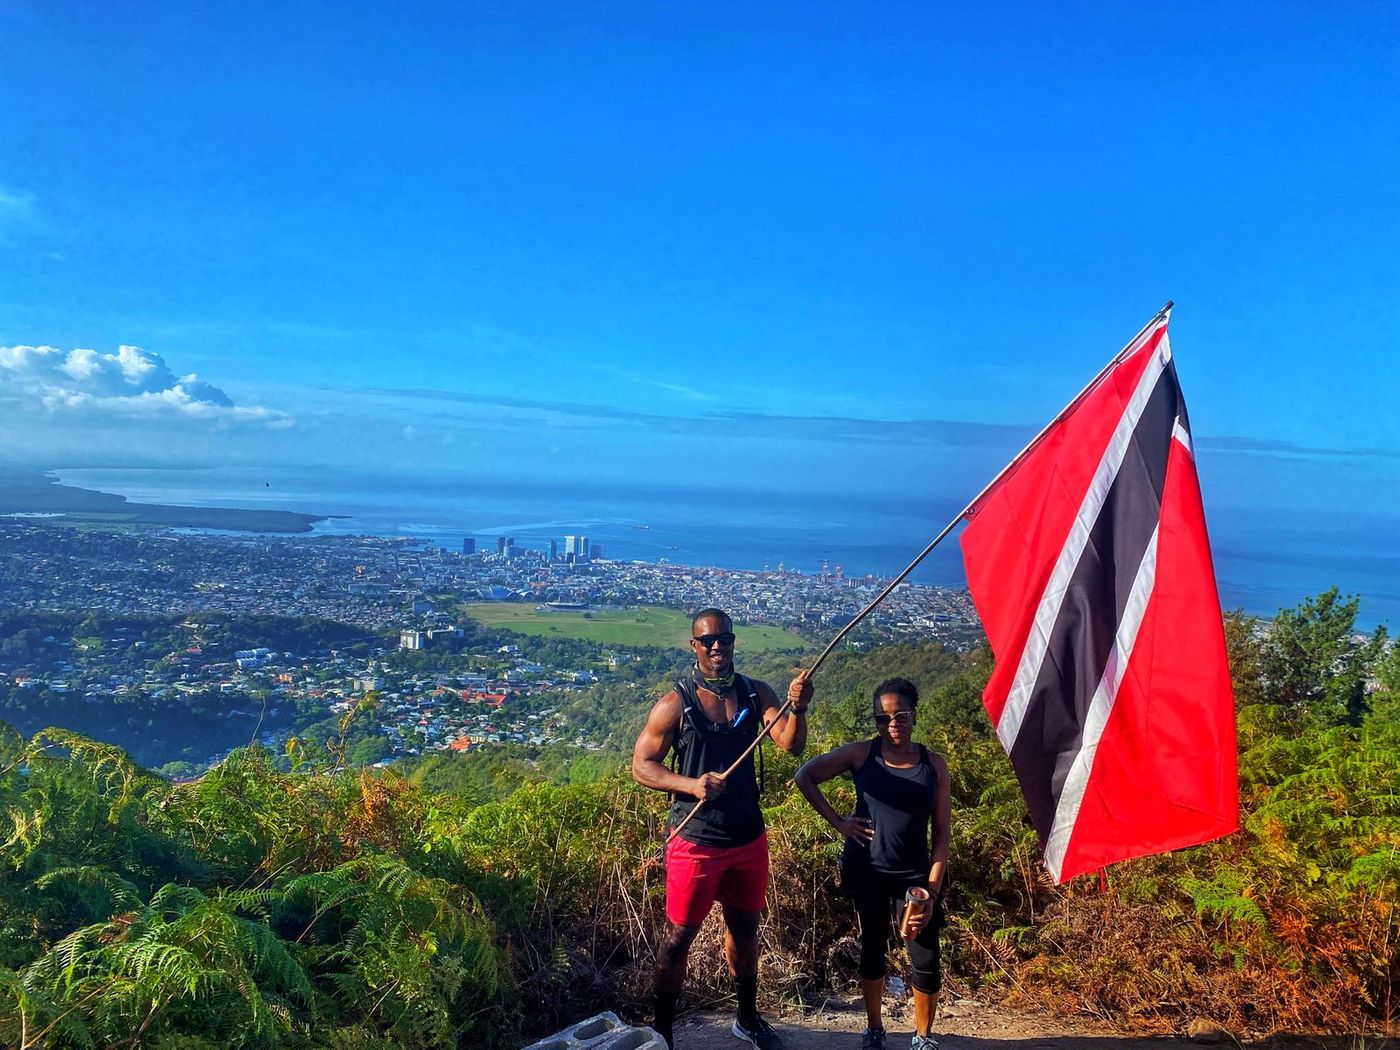 Getting ready to bring to you the vibe and essence of my beautiful country #trinidadandtobago 🇹🇹

You will feel so much enlightenment. 

Delighted to be part of the BUA family..

🔵⚪️🏴󠁧󠁢󠁥󠁮󠁧󠁿🤝🇹🇹🔵🟠 …. 🙌🏽🔥😁